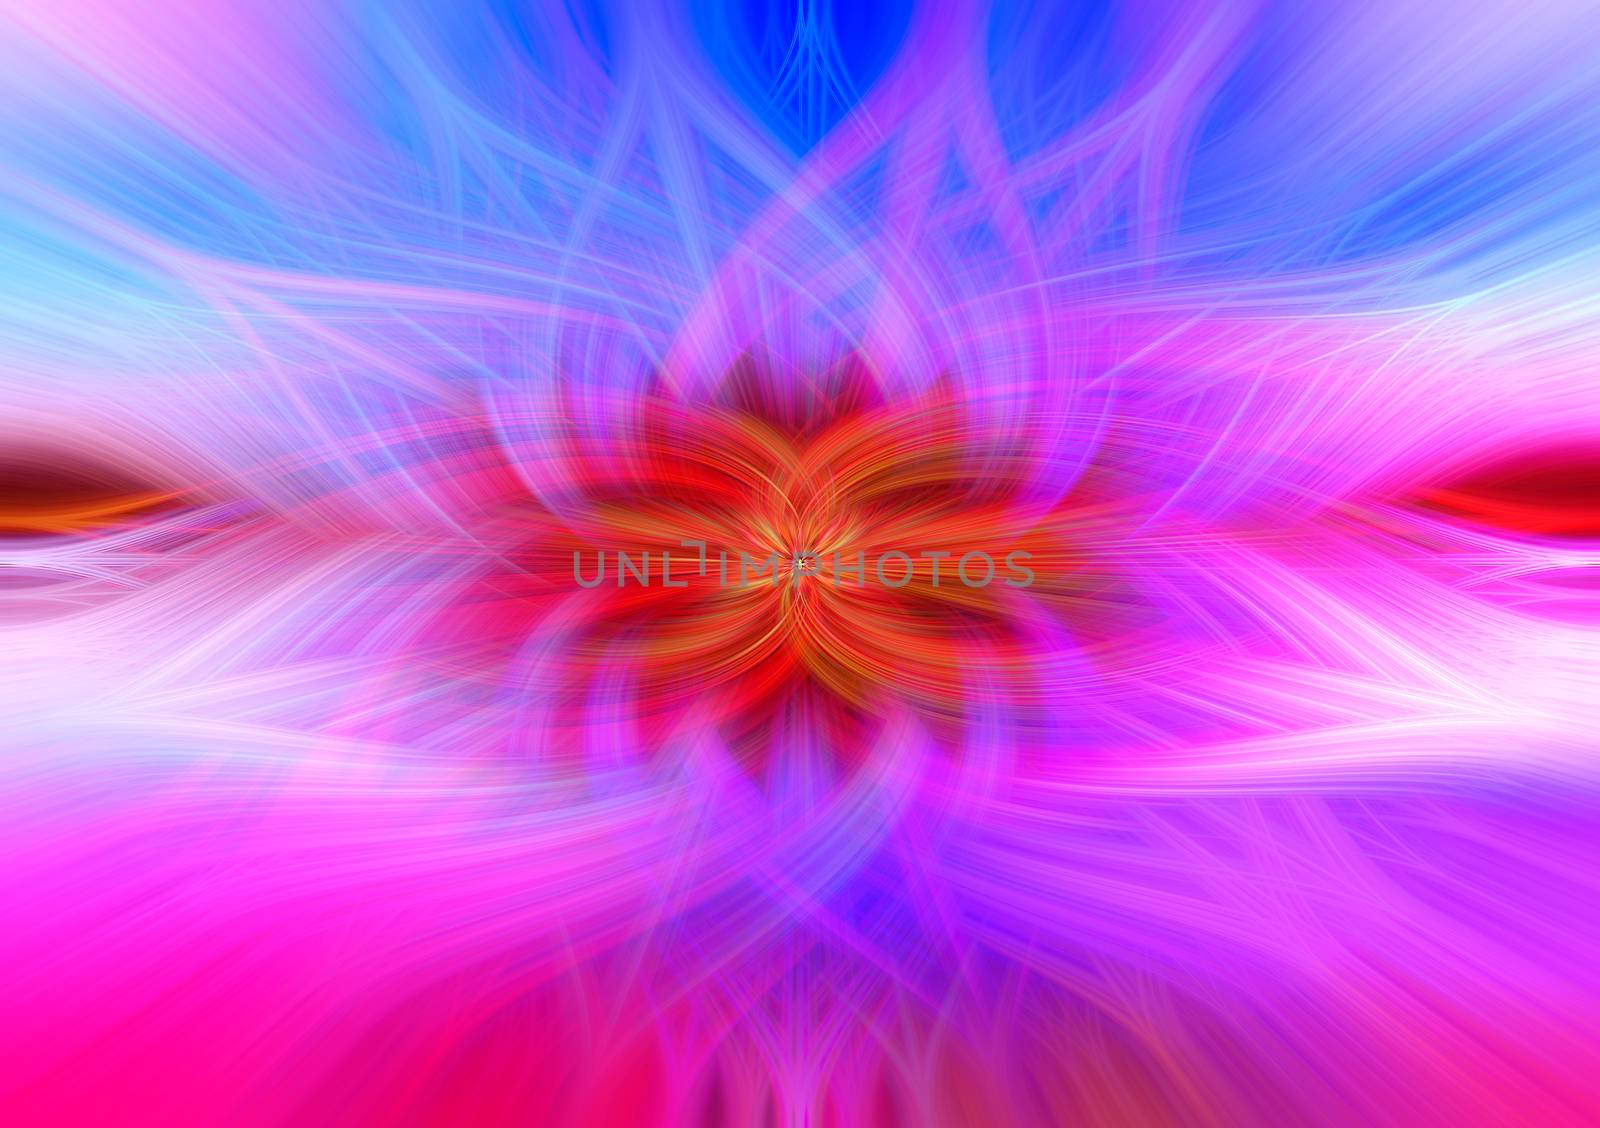 Beautiful abstract intertwined 3d fibers forming symmetrical ornament made of various shapes. Pink, blue, red, purple, and orange colors. Illustration.